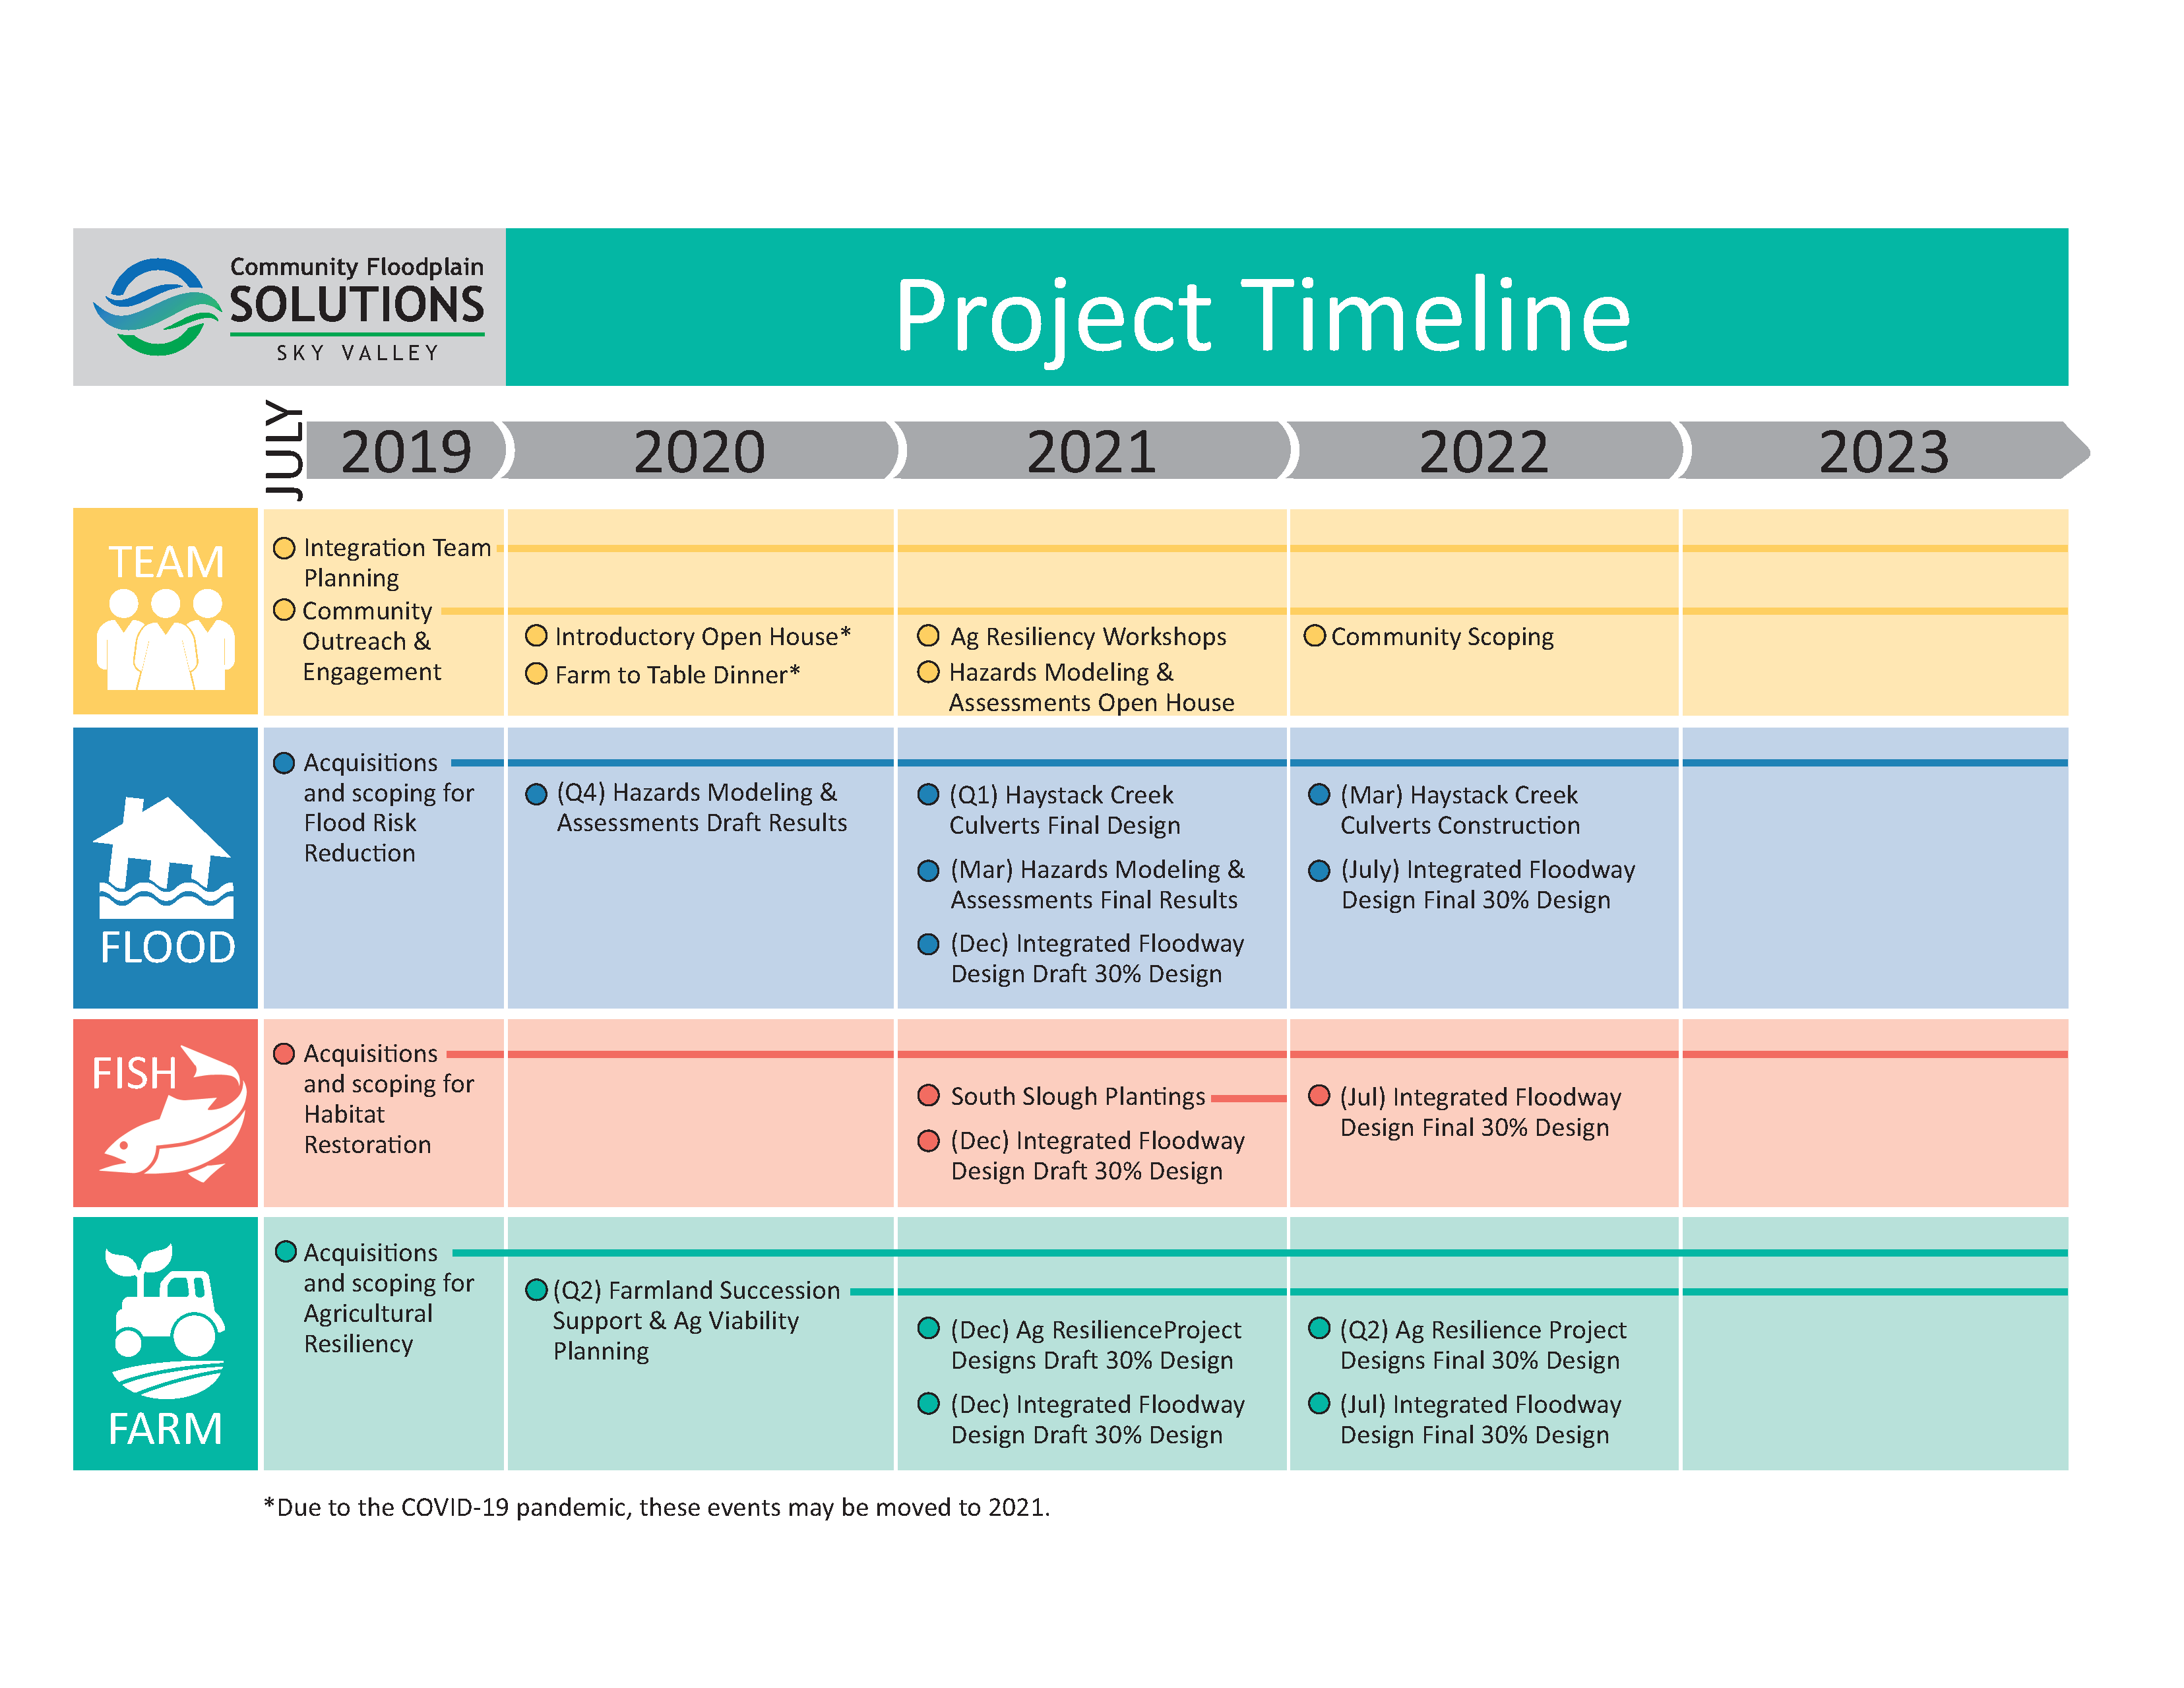 Project timeline from year 2019 to year 2023. By 2022 the team will do community scoping. The flood department will execute haystack creek culverts construction and 30 percent of design. Farm department will execute 30 percent of resilience project design